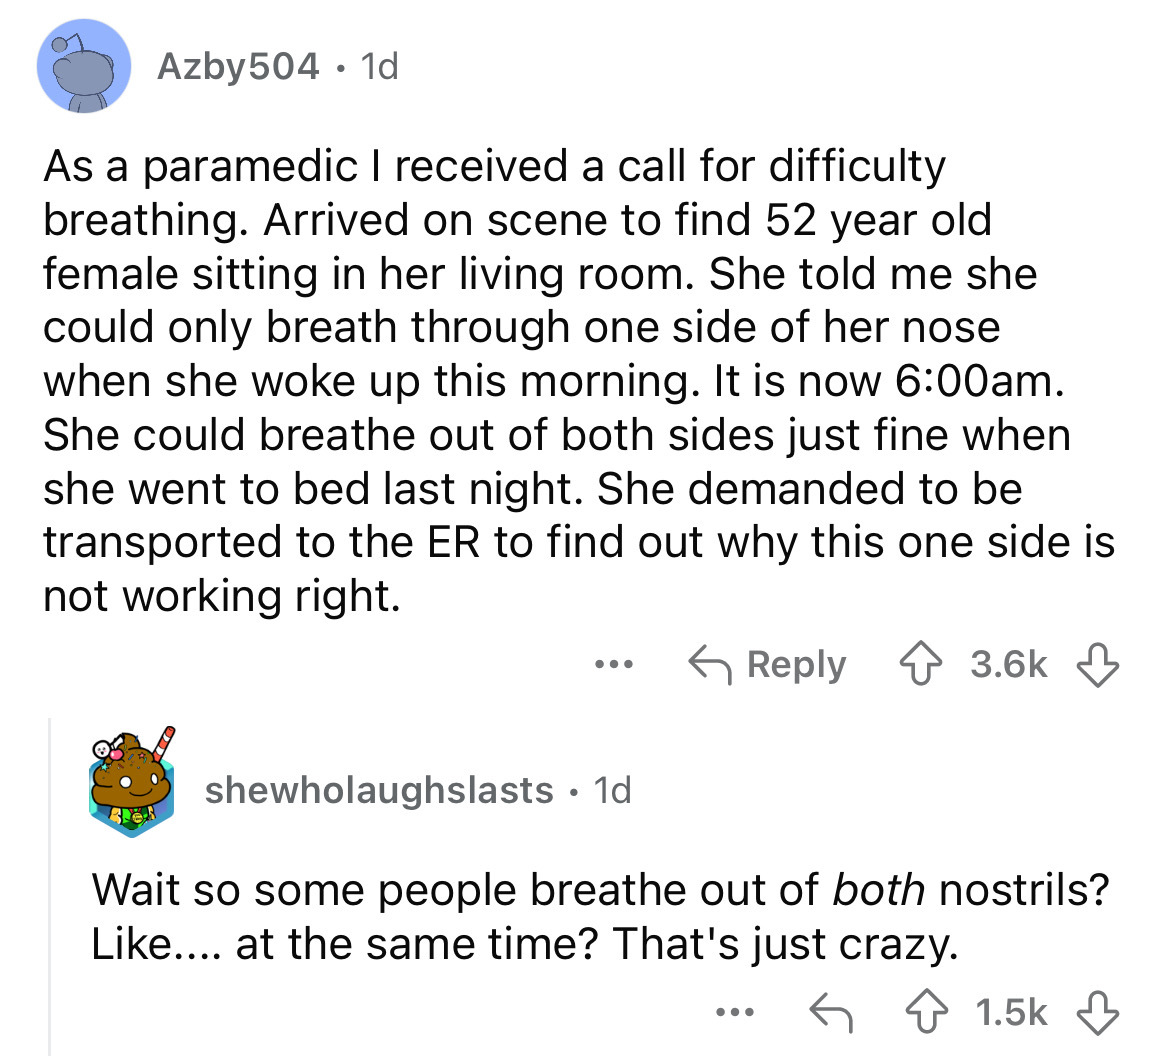 screenshot - Azby 504 1d As a paramedic I received a call for difficulty breathing. Arrived on scene to find 52 year old female sitting in her living room. She told me she could only breath through one side of her nose when she woke up this morning. It is